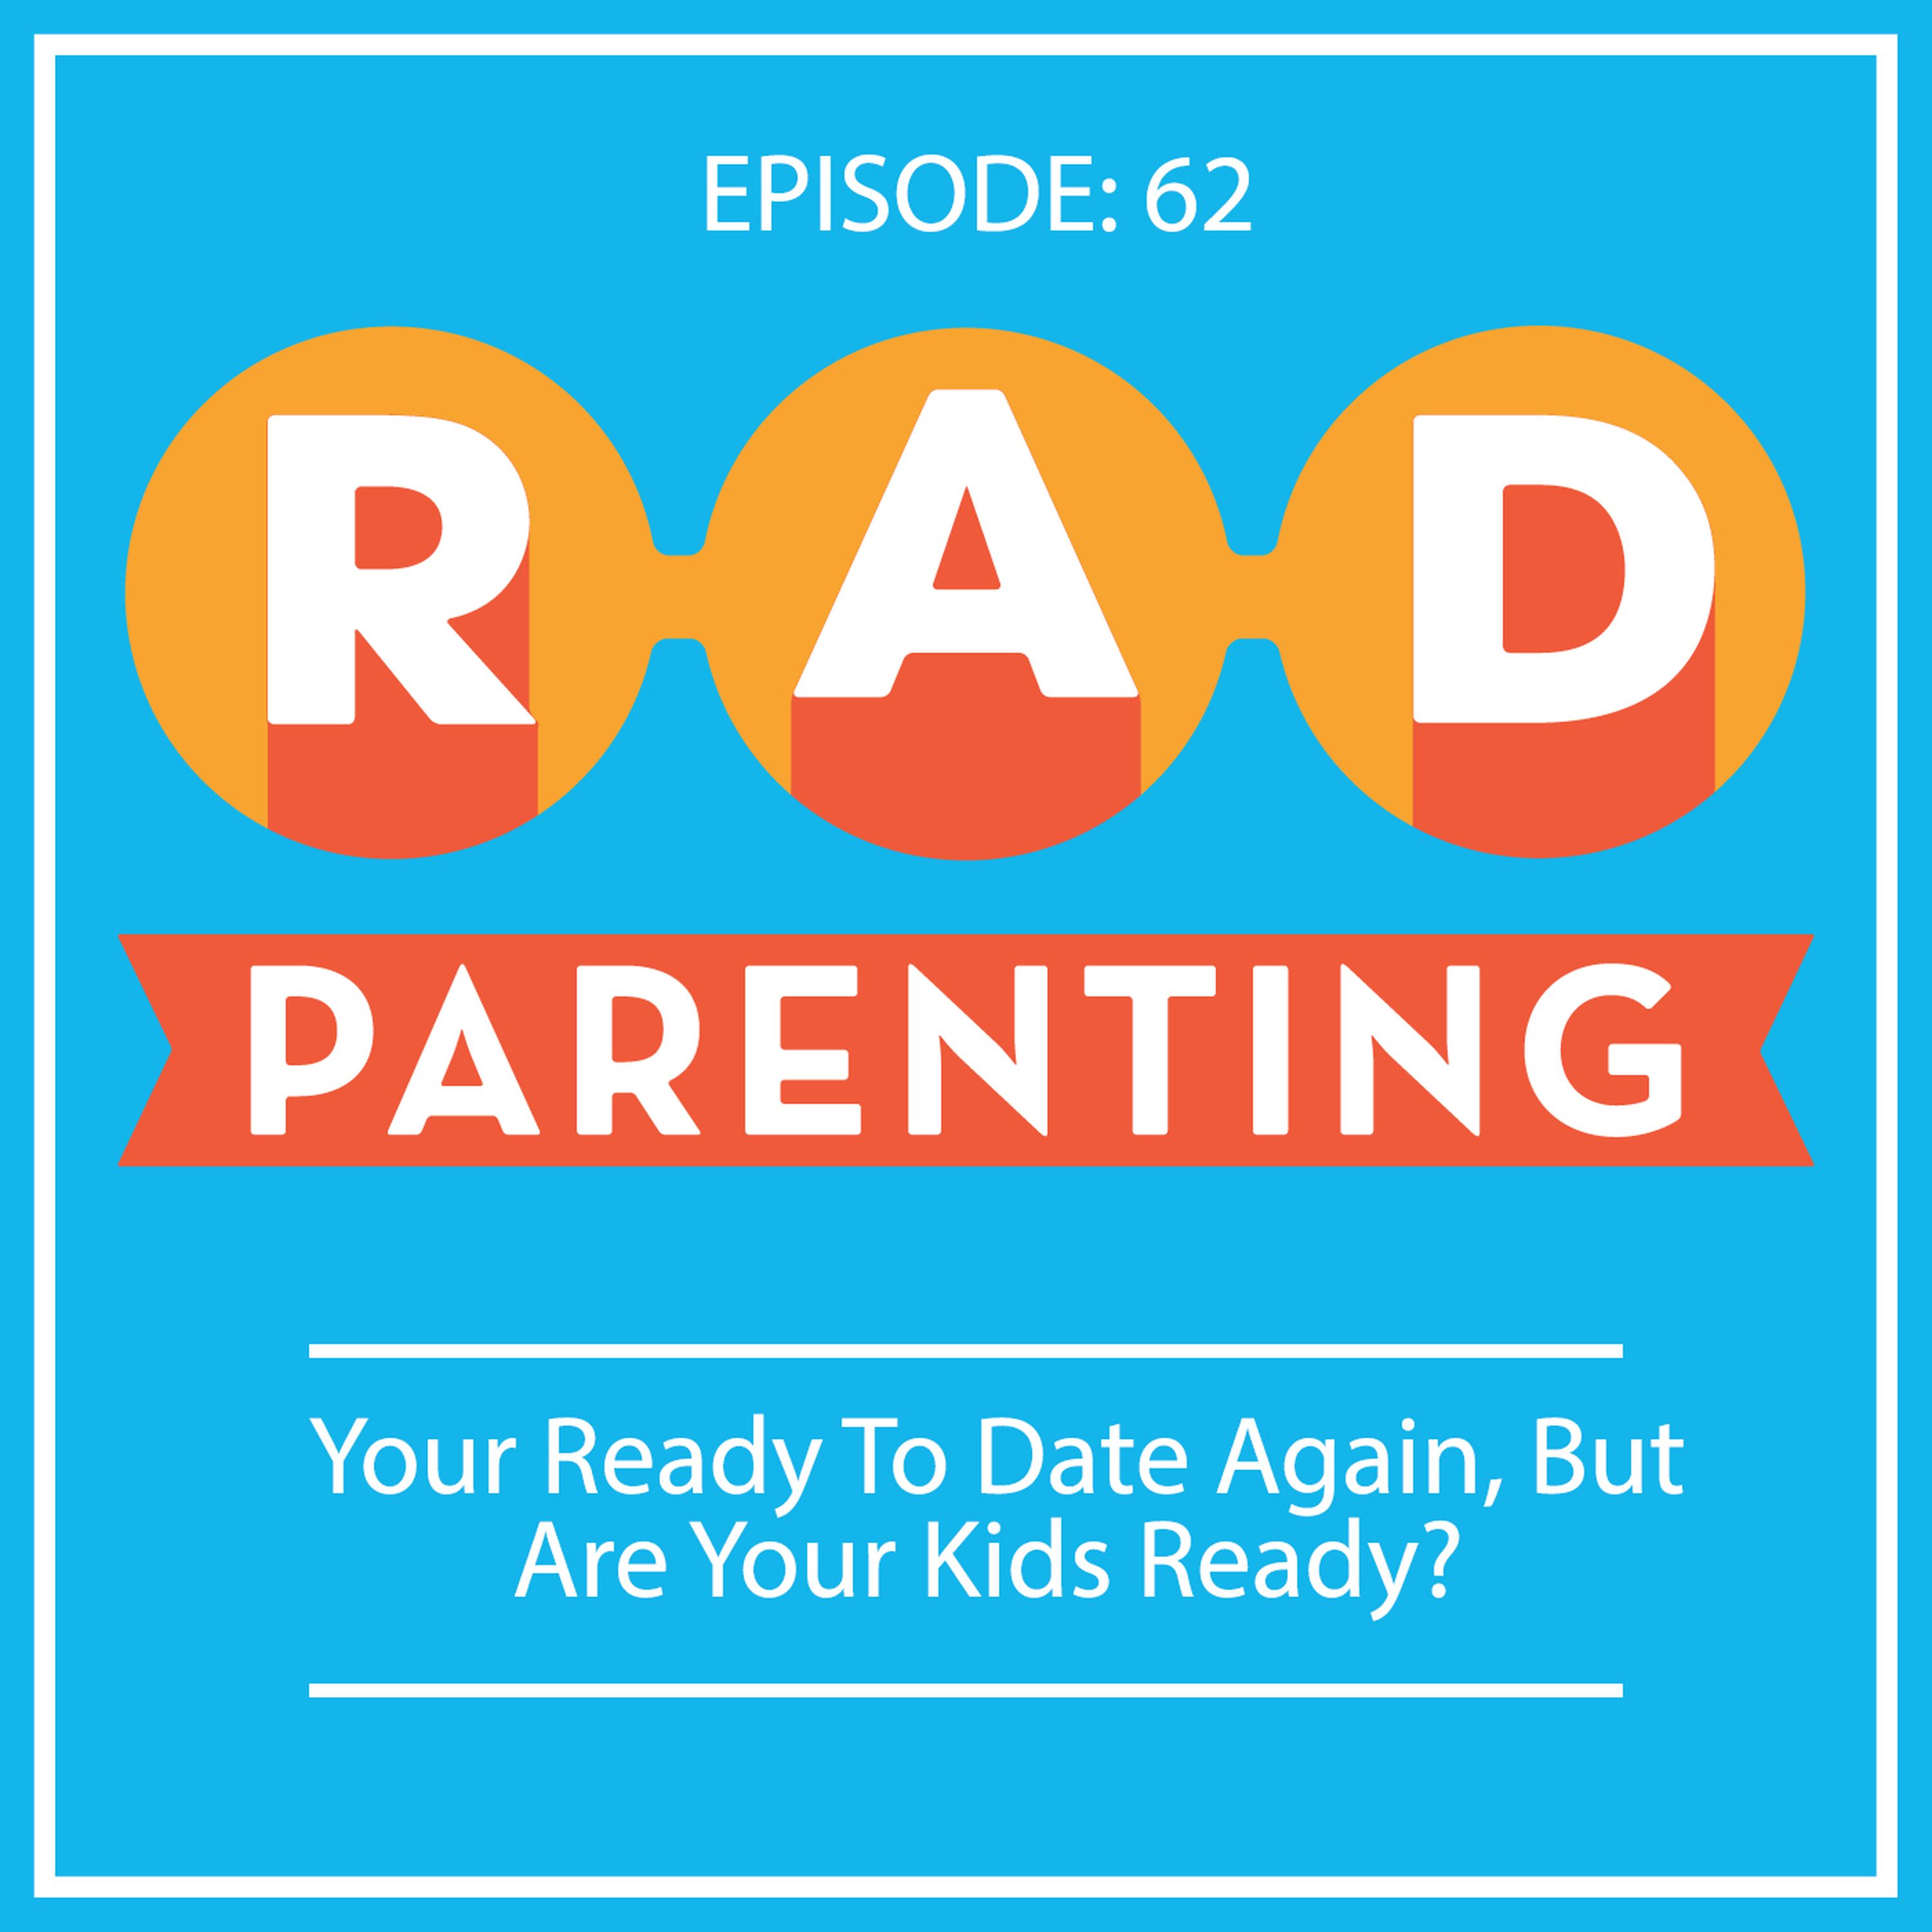 You're Ready To Date Again, But Are Your Kids Ready?